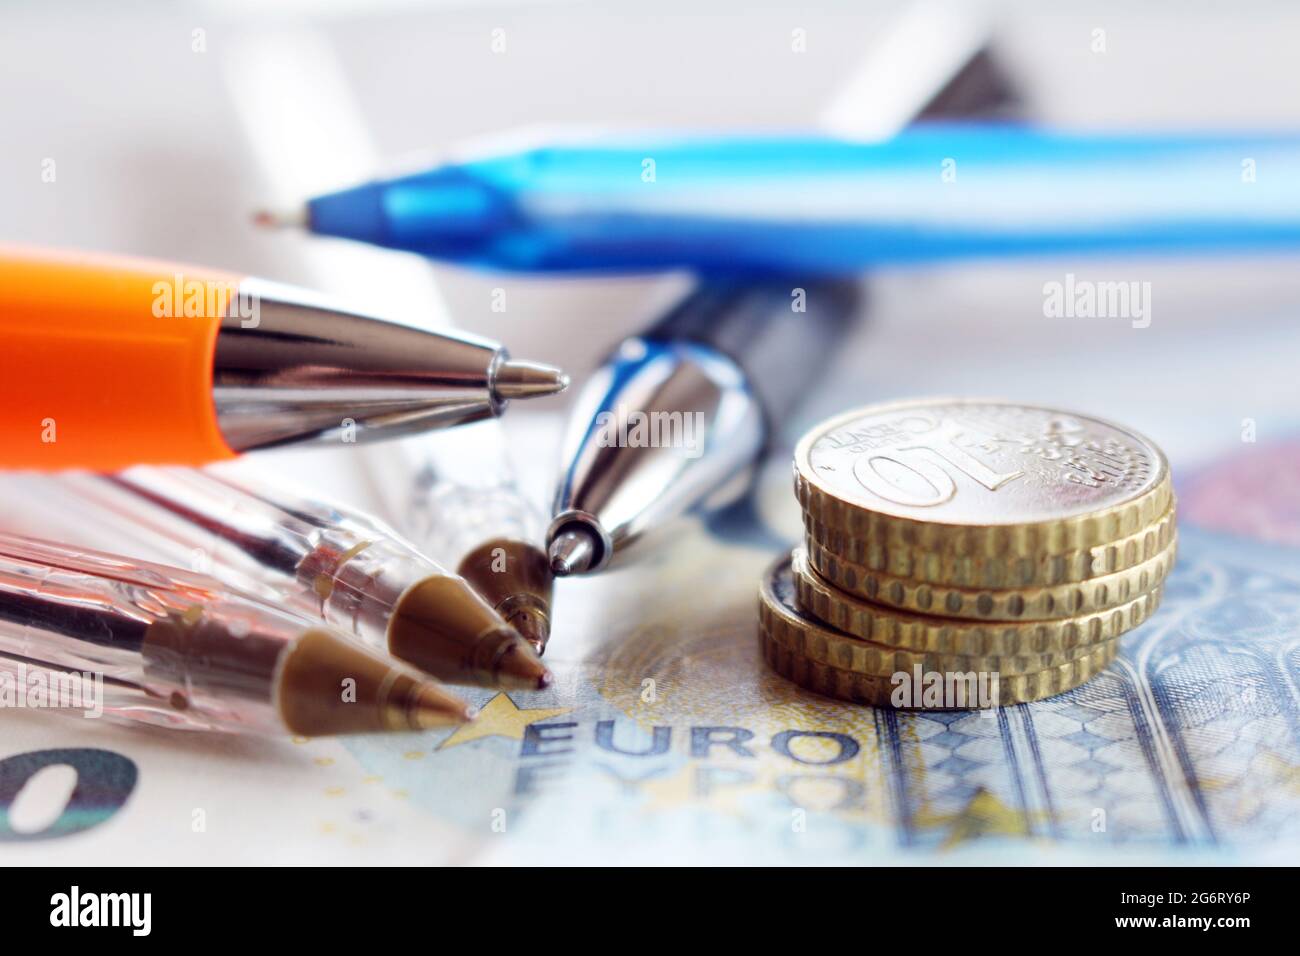 Assembly approves the financial statements. Above detail business view, pen, euro coins, on office desk, finance concept. Stock Photo